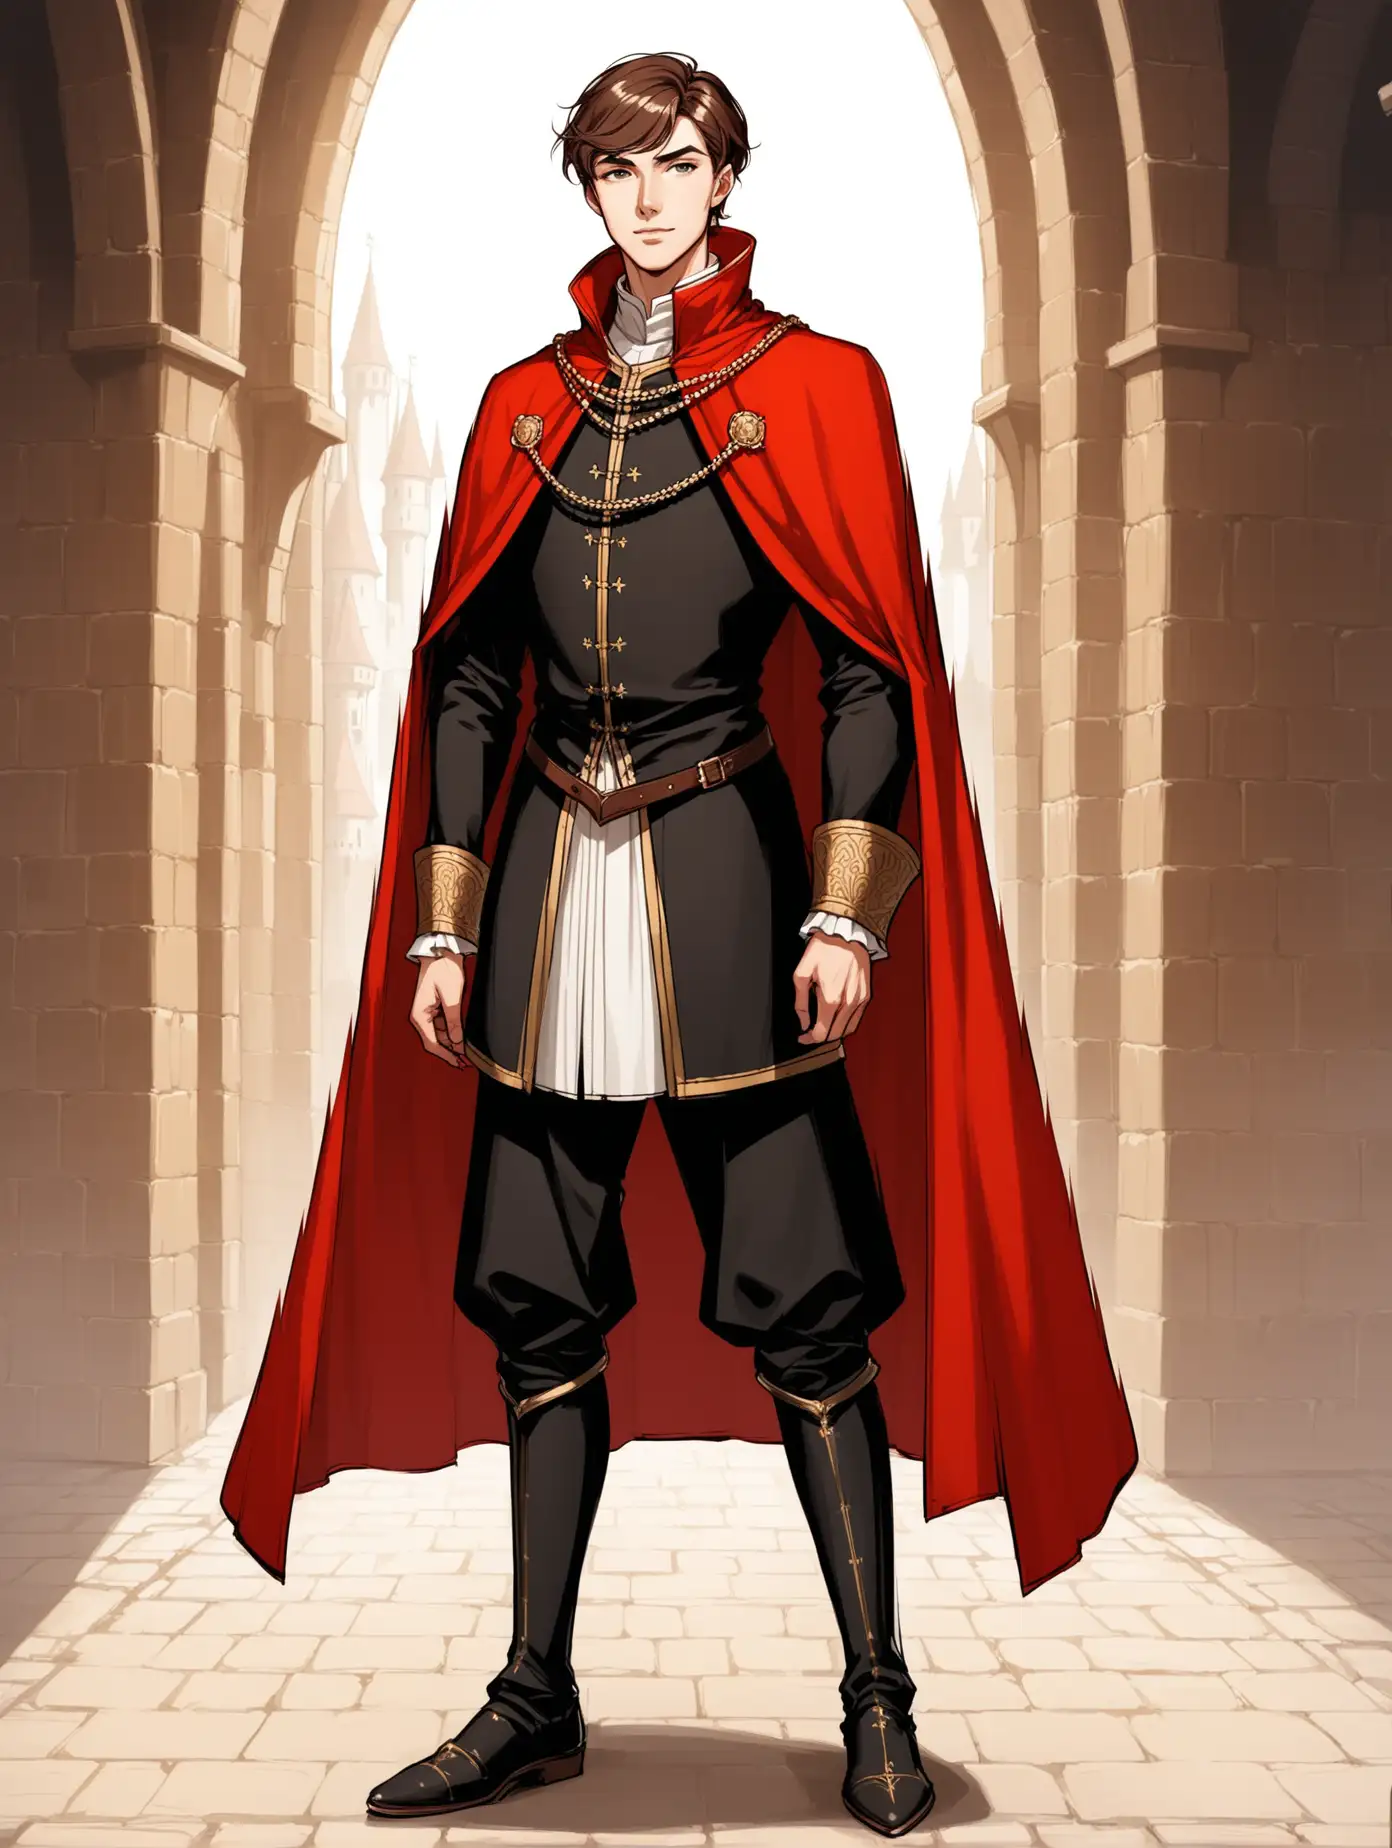 Aristocrat-Man-in-Medieval-Black-Clothing-with-Red-Cloak